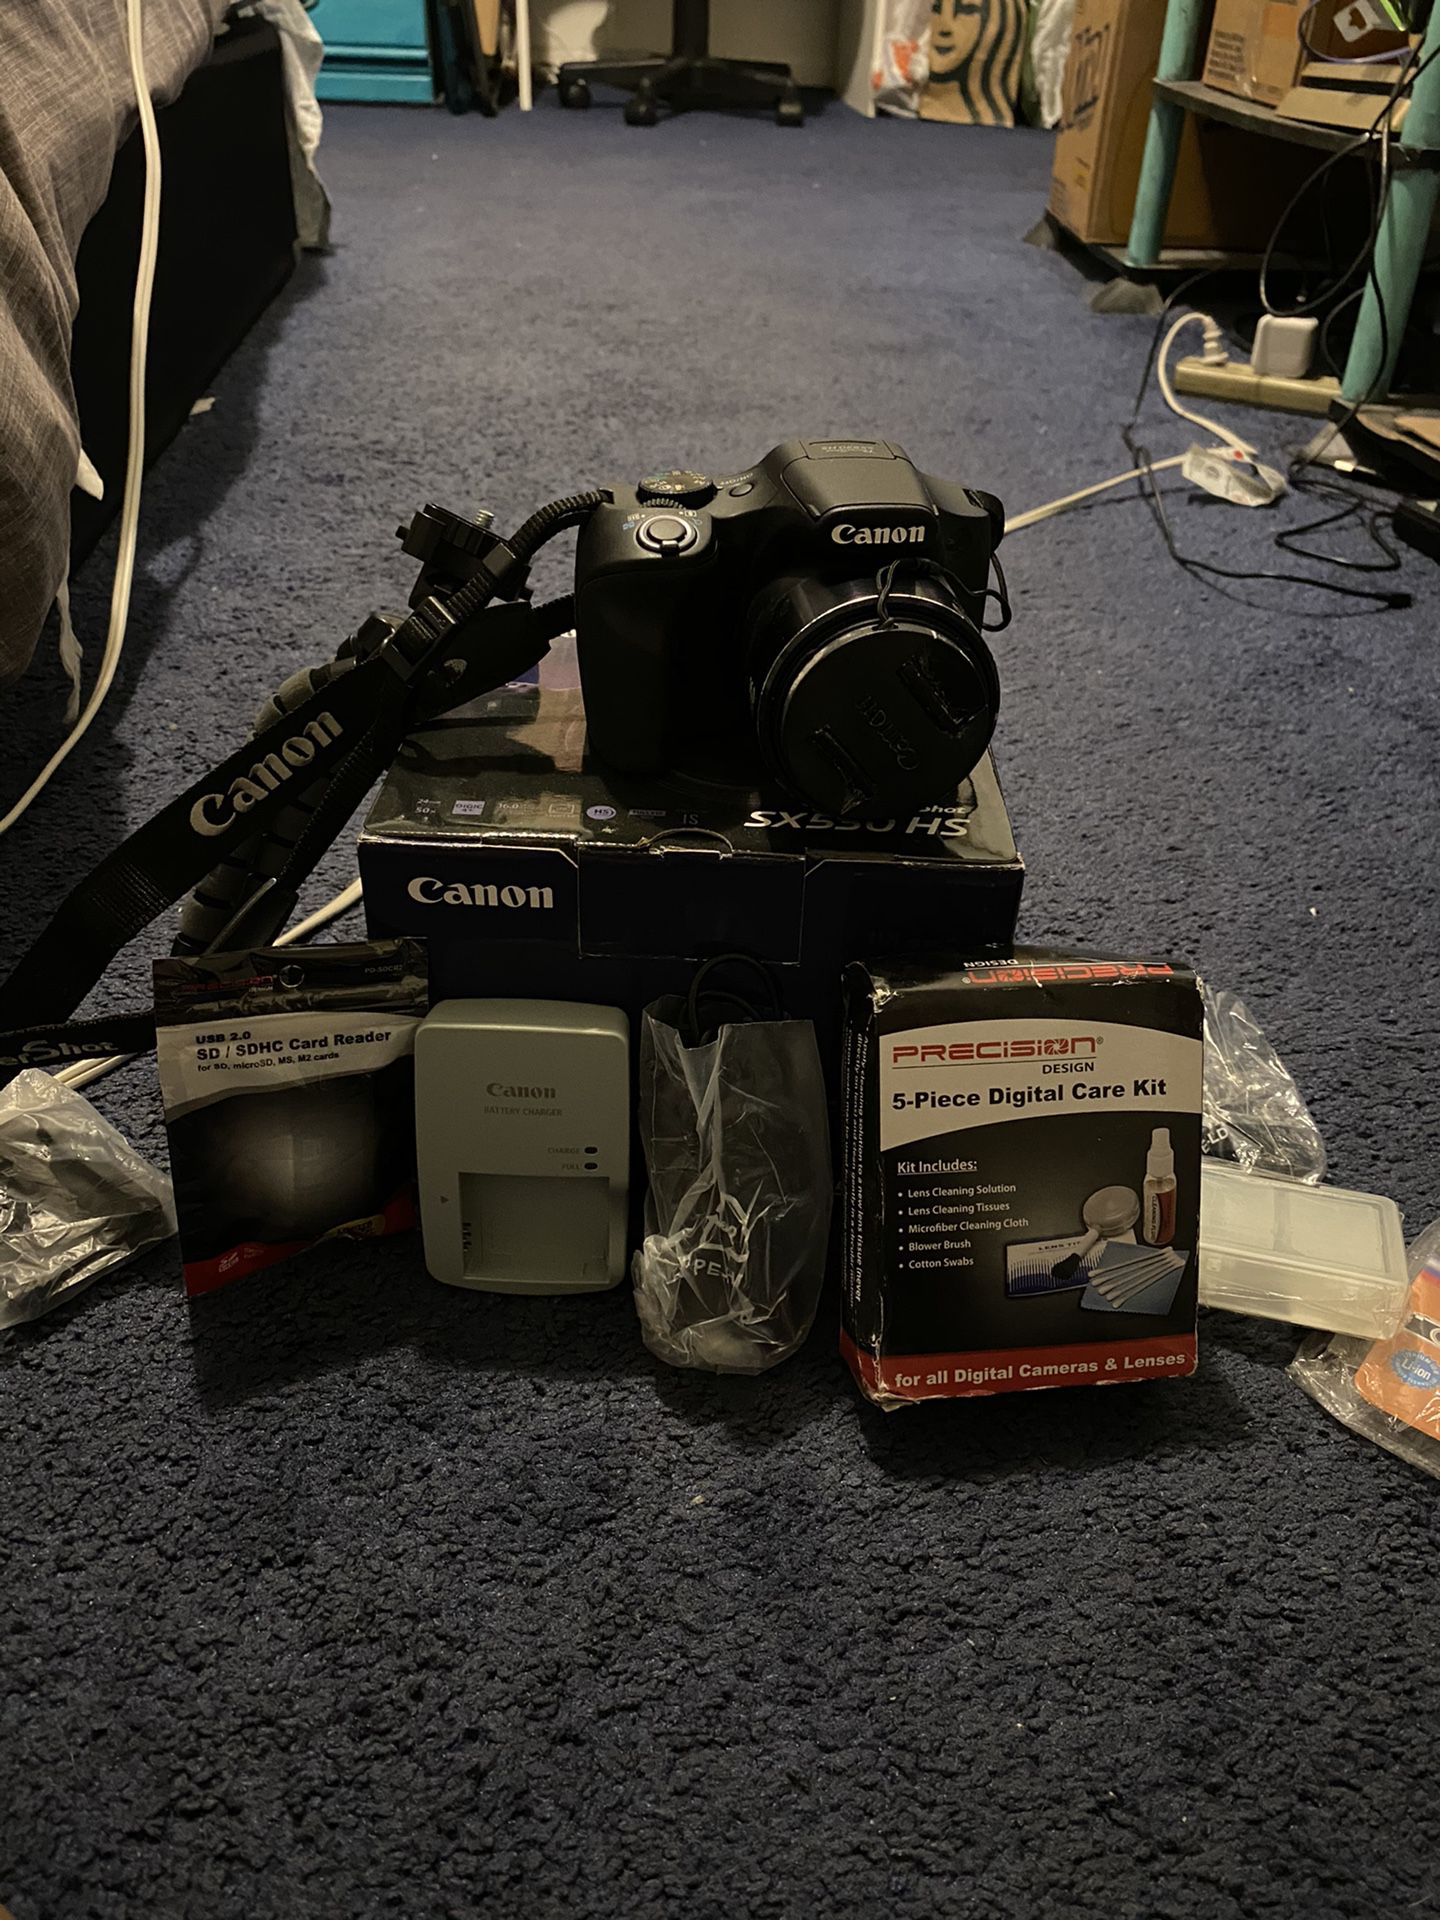 Canon Powershot SC530 HS with accessories